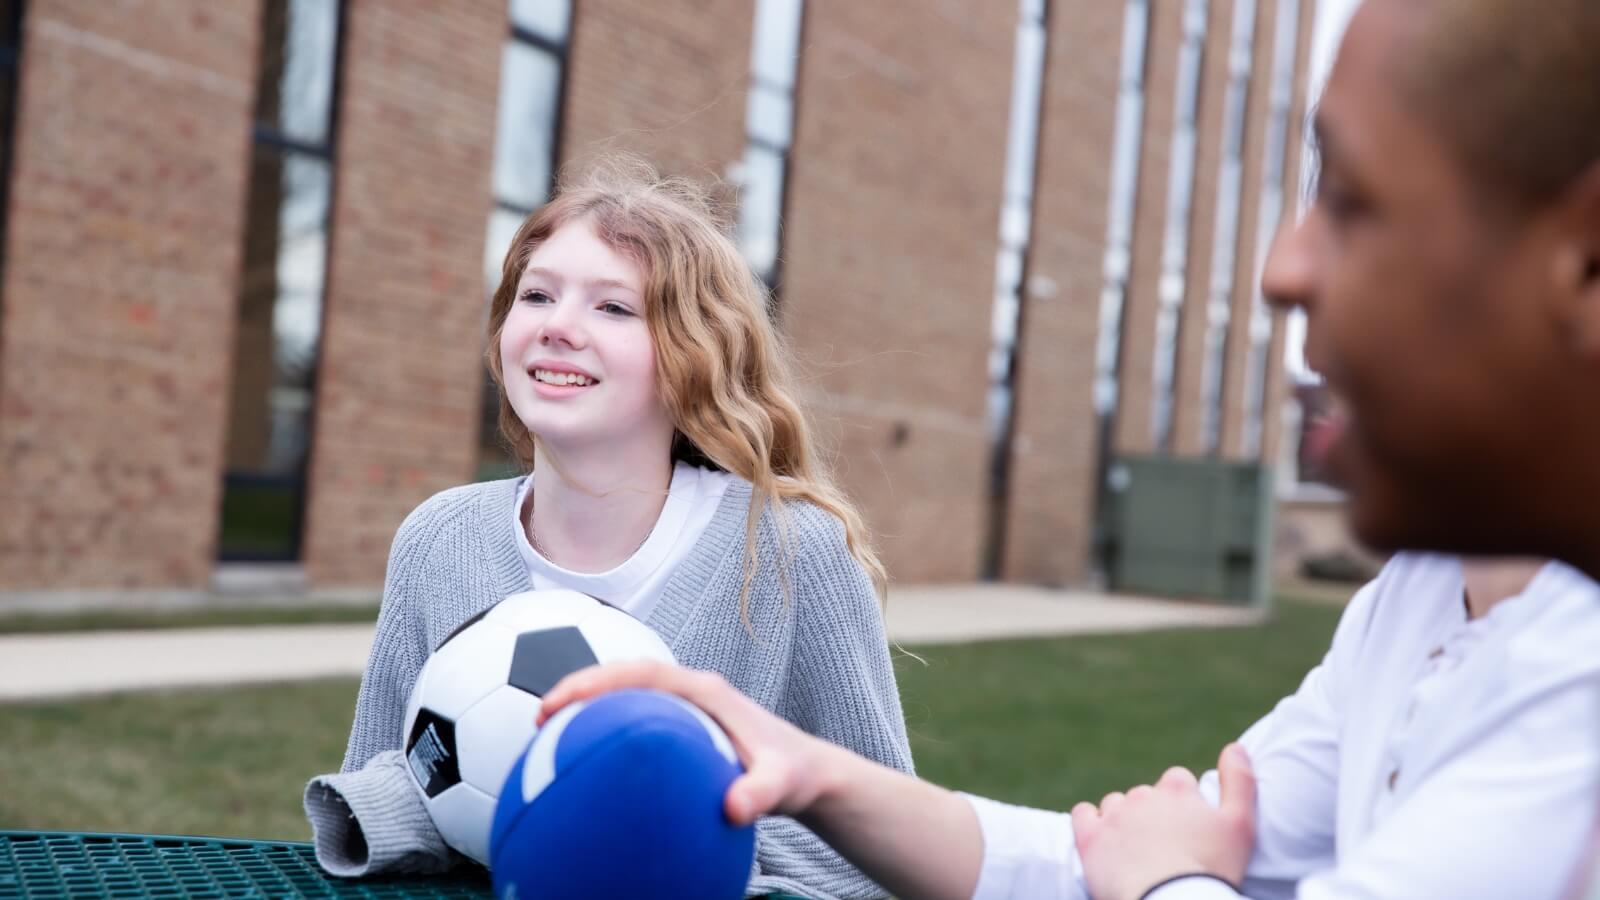 A young girl sitting at an outdoor table holding a soccer ball and engages in conversation with a person opposite her.